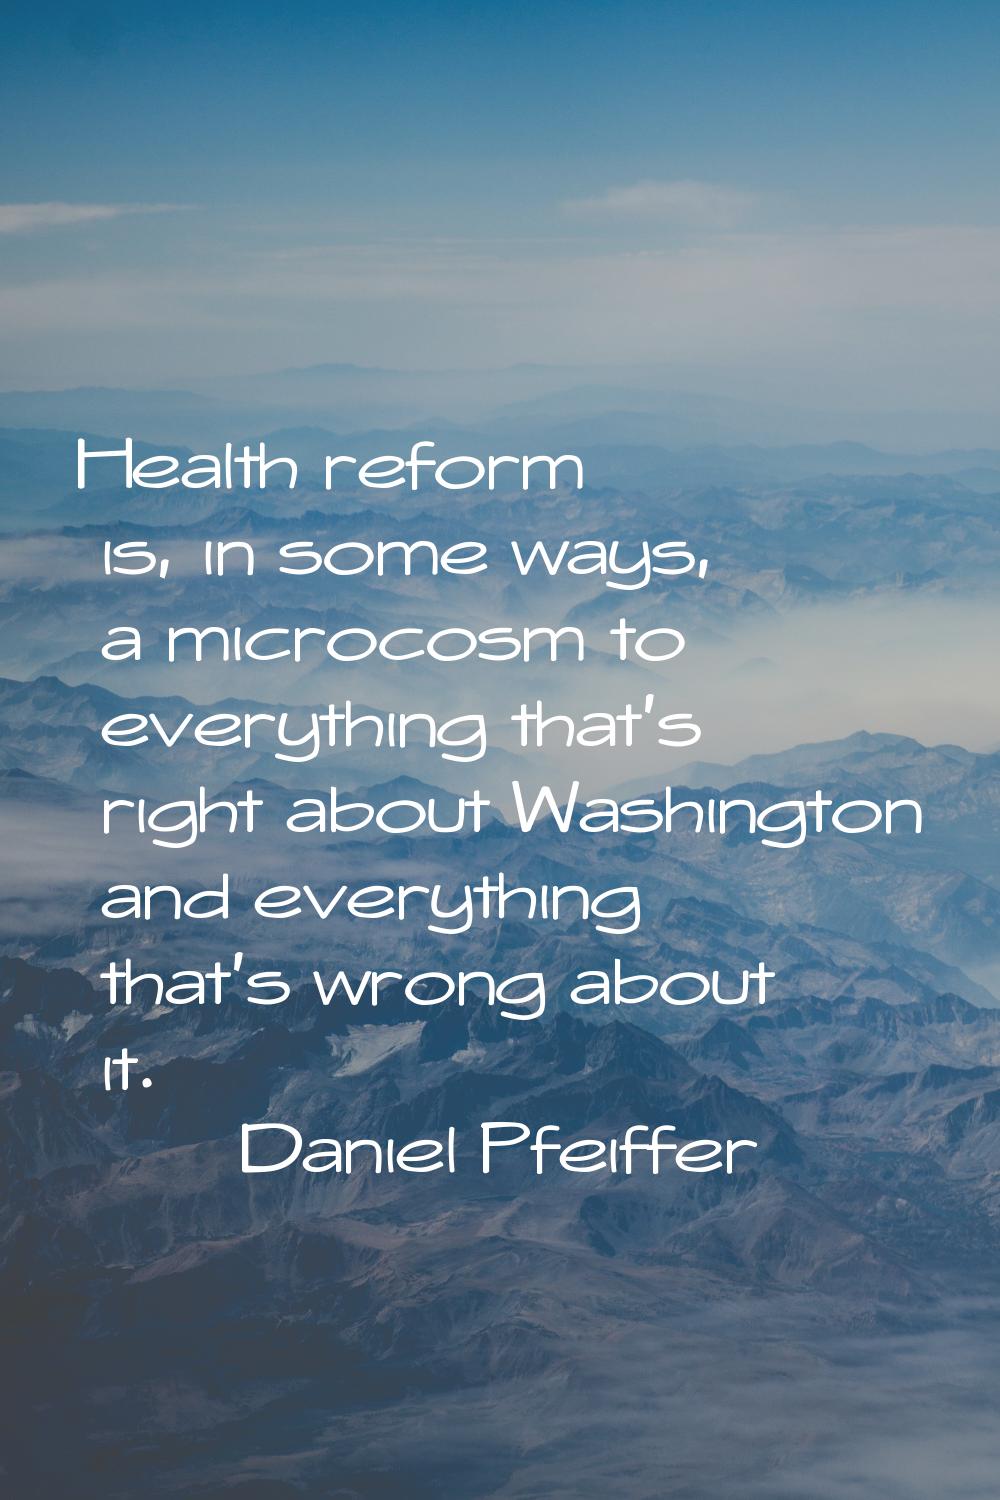 Health reform is, in some ways, a microcosm to everything that's right about Washington and everyth